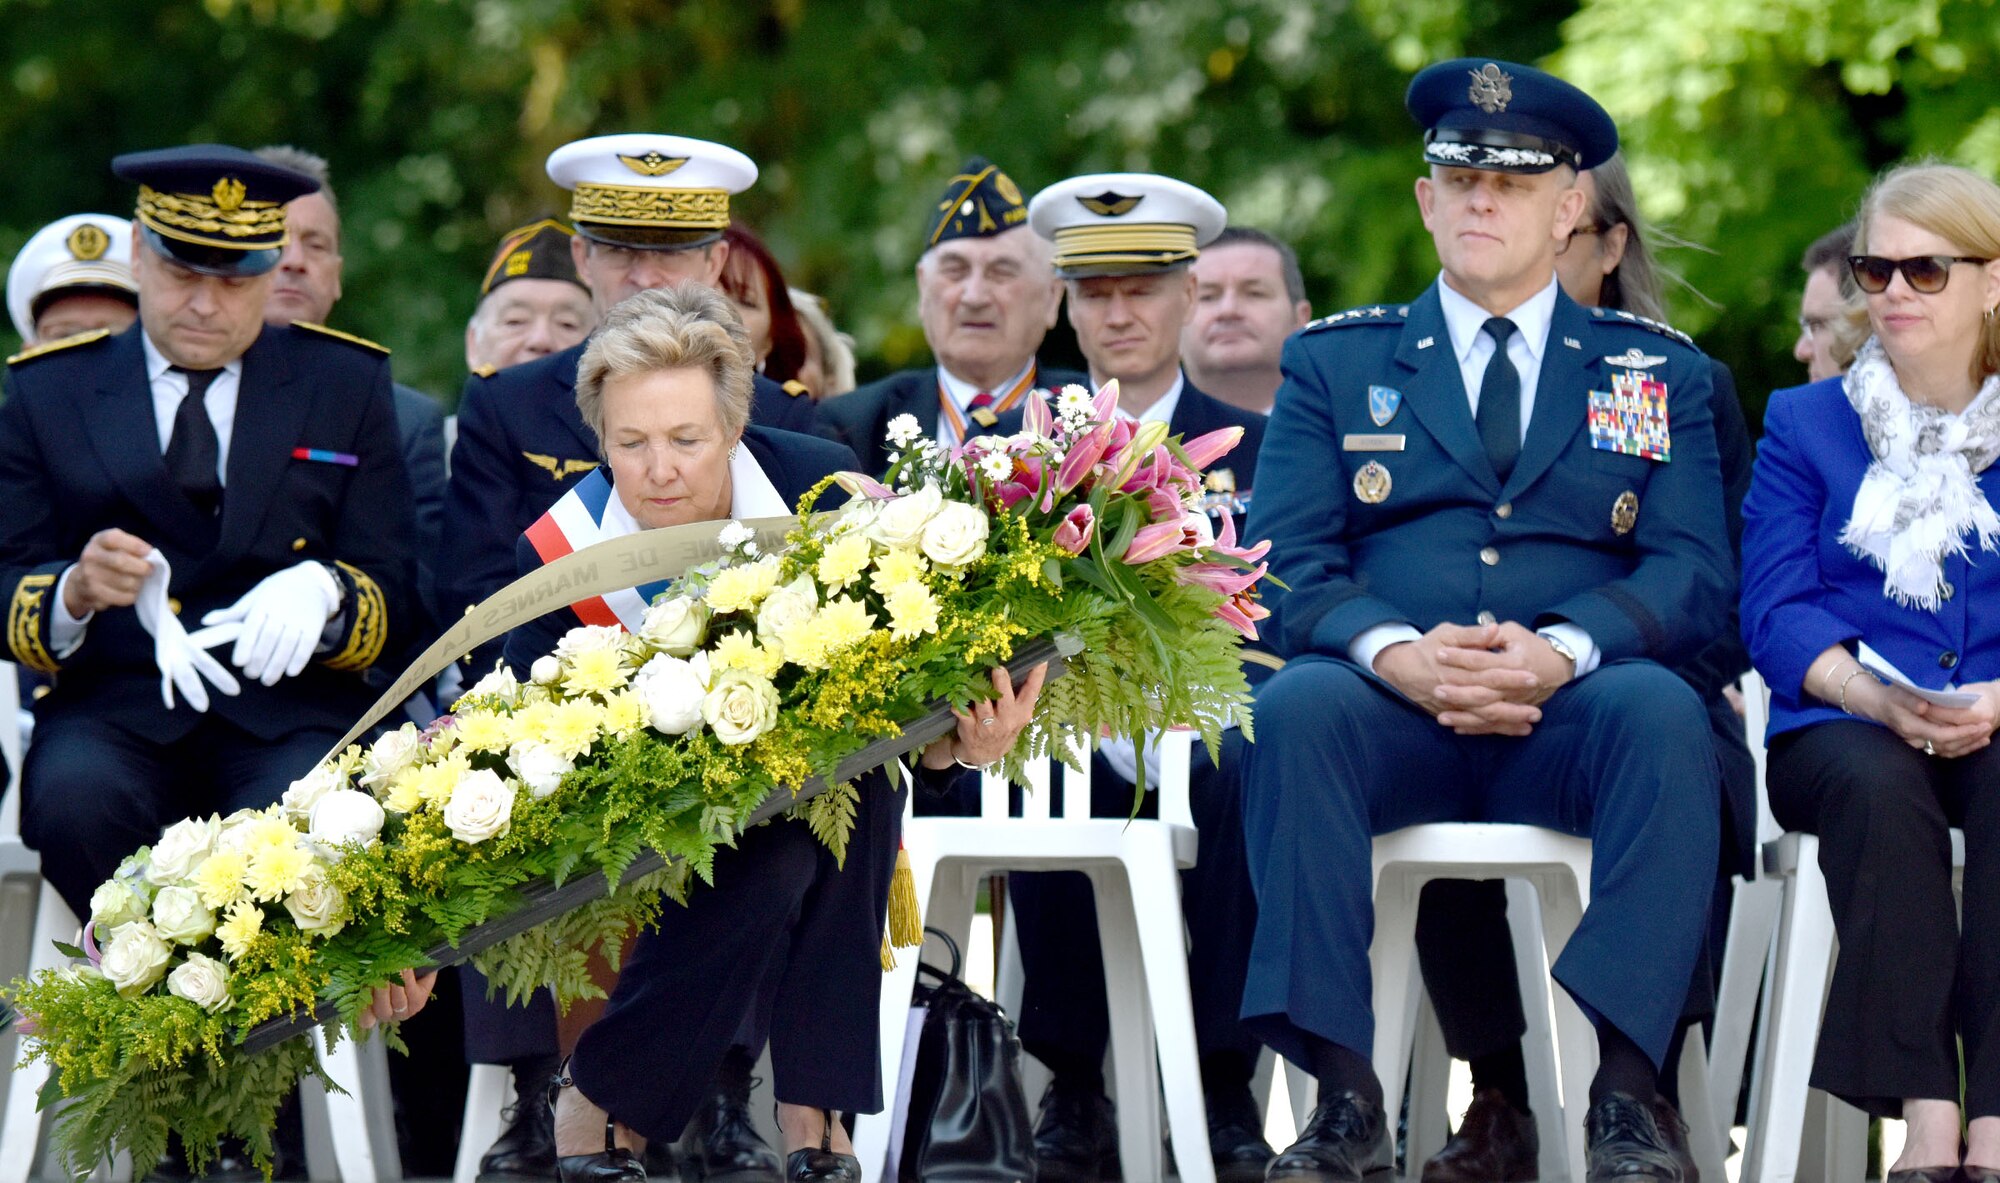 PARIS - U.S. Air Force Airmen from Ramstein Air Base, Germany, commemorate Memorial Day in a ceremony with their French counterparts at the Lafayette Escadrille Memorial, in Marnes-la-Coquette, France, May 28, 2016. (U.S. Air Force photo by Senior Master Sgt. Brian Bahret/Released)